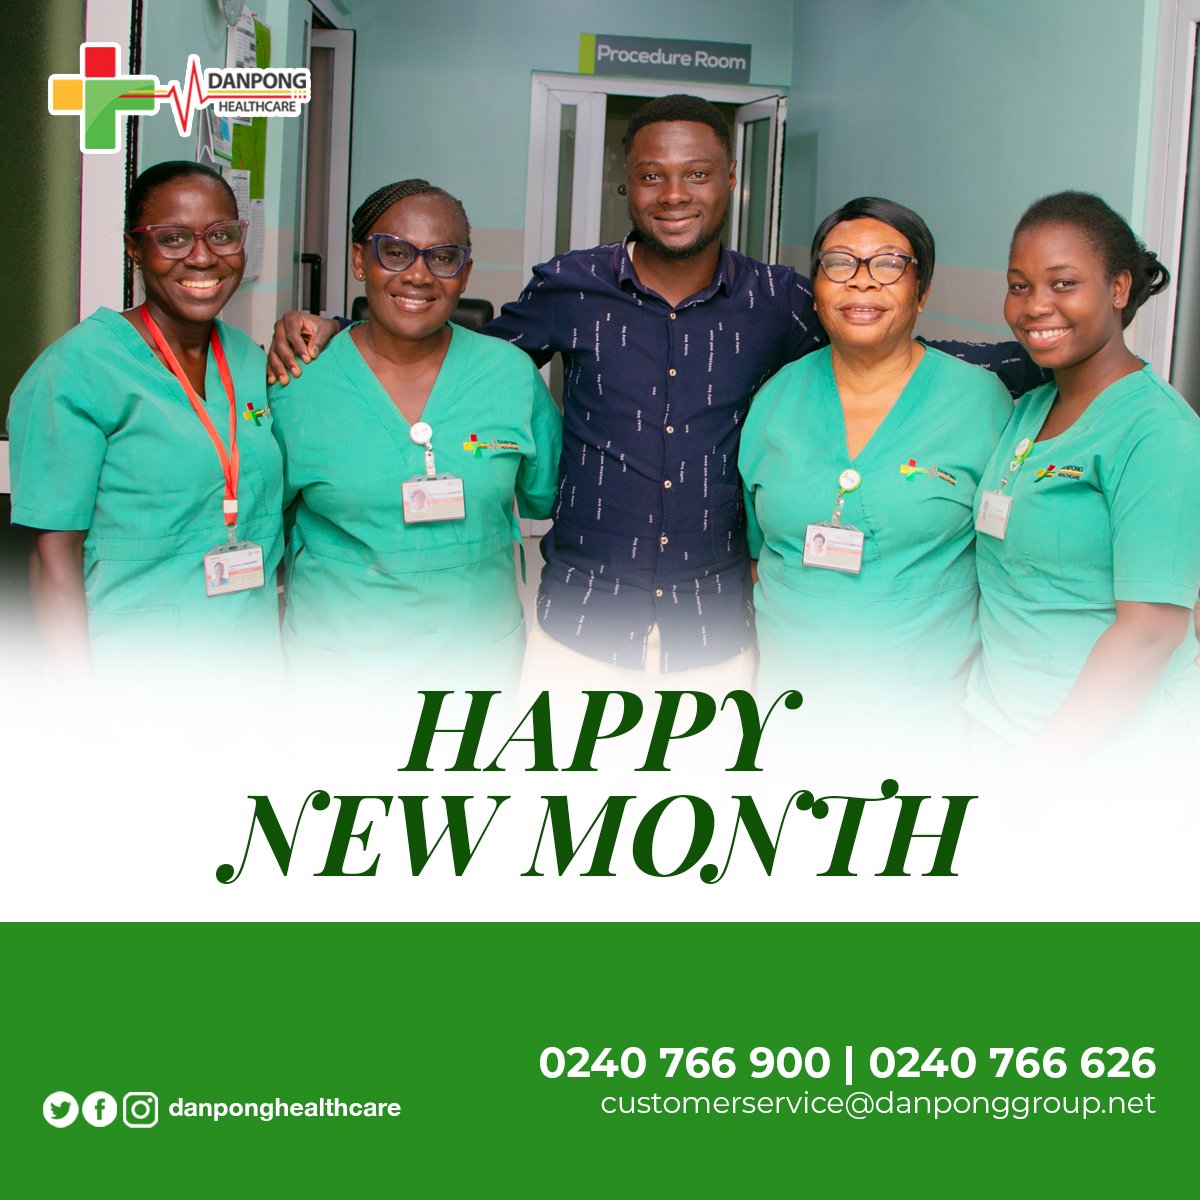 Happy New Month
#Danpongcares
#healthyandhappy
#HappyNewMonth